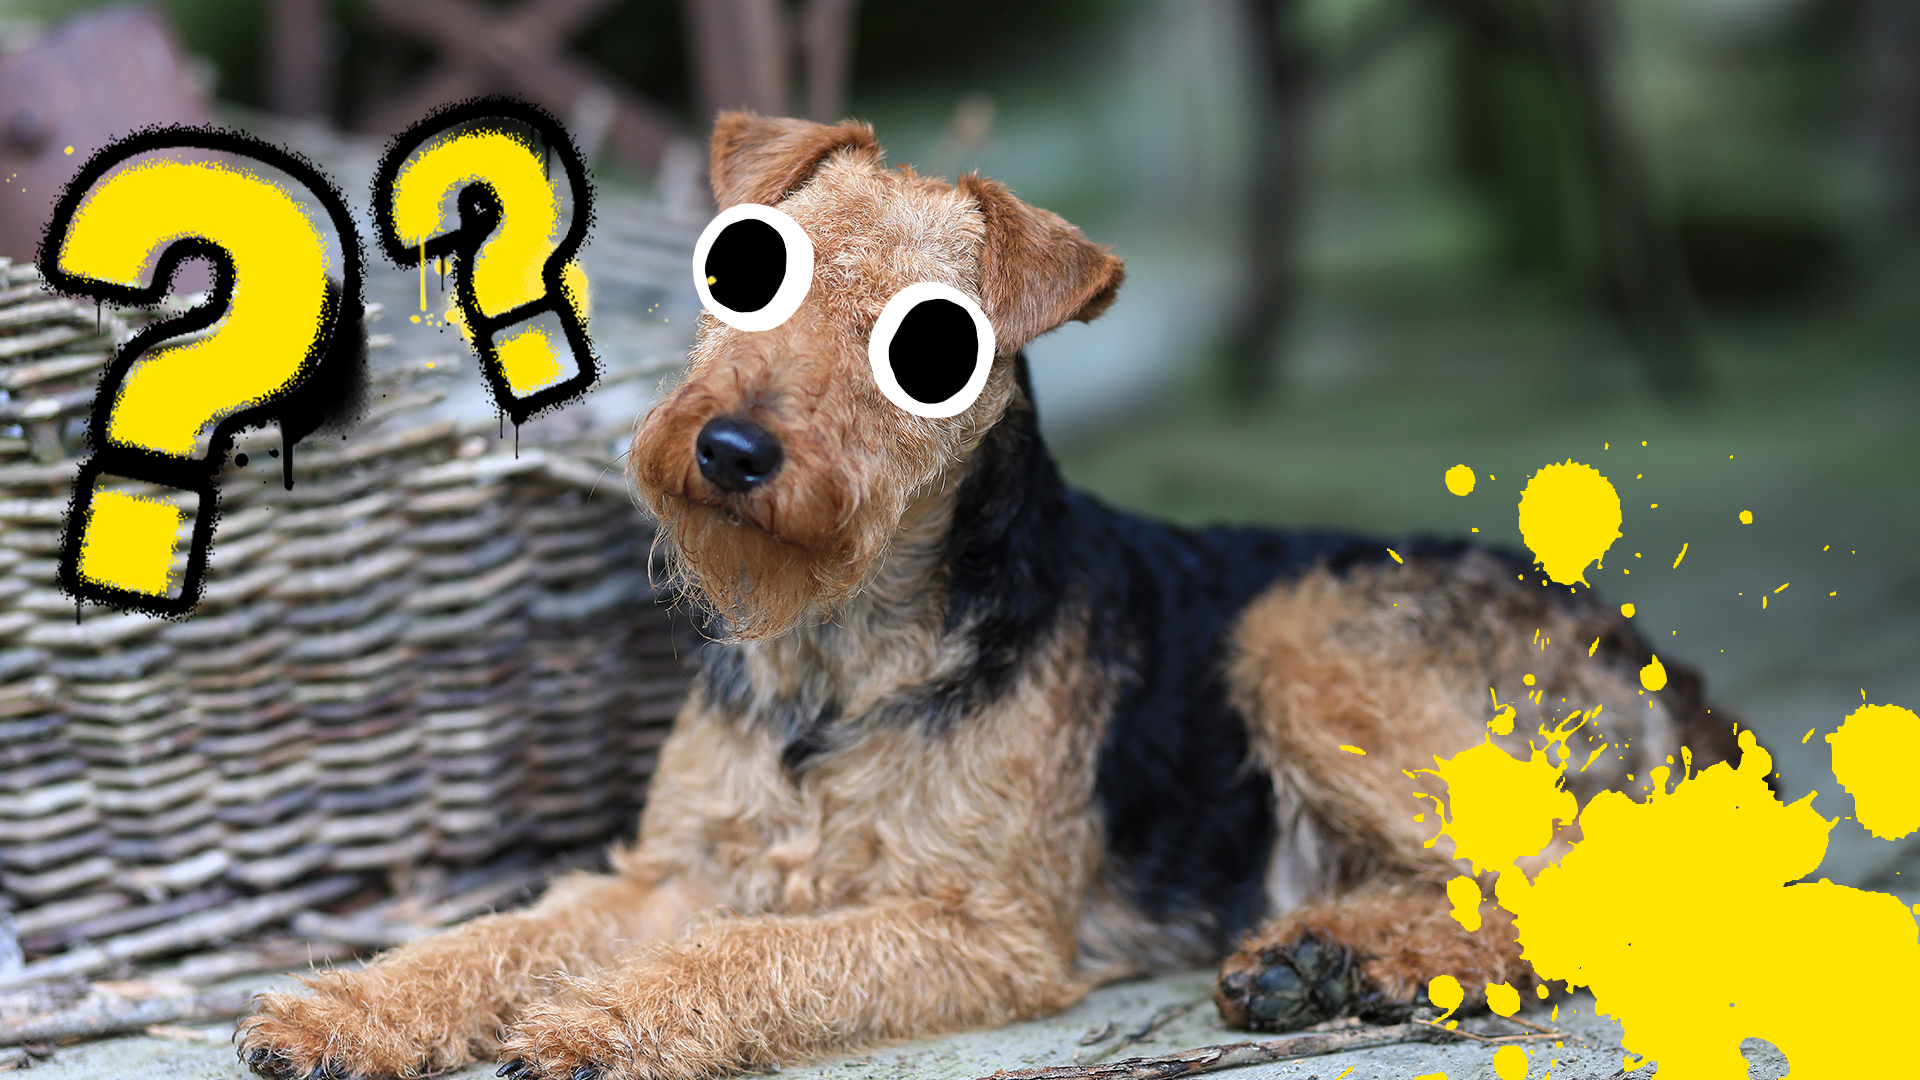 Terrier with question mark and splats